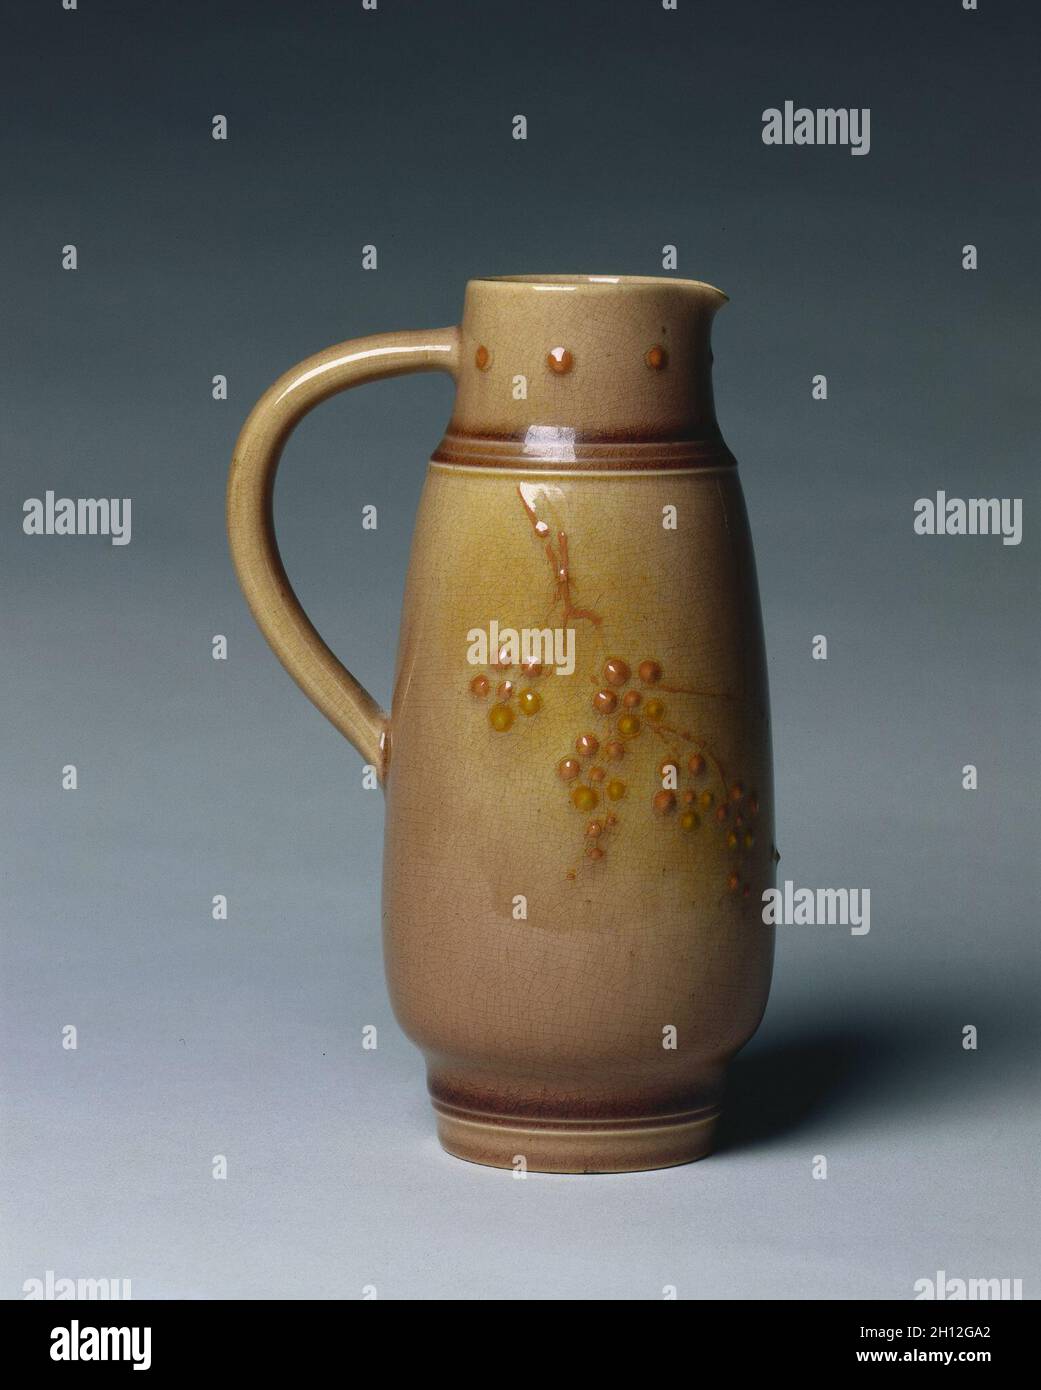 Small Pitcher, 1885. Martin Rettig (American, 1869-1956), Rookwood Pottery Company (American, established 1880). Earthenware; overall: 13.8 x 9 cm (5 7/16 x 3 9/16 in.). Stock Photo